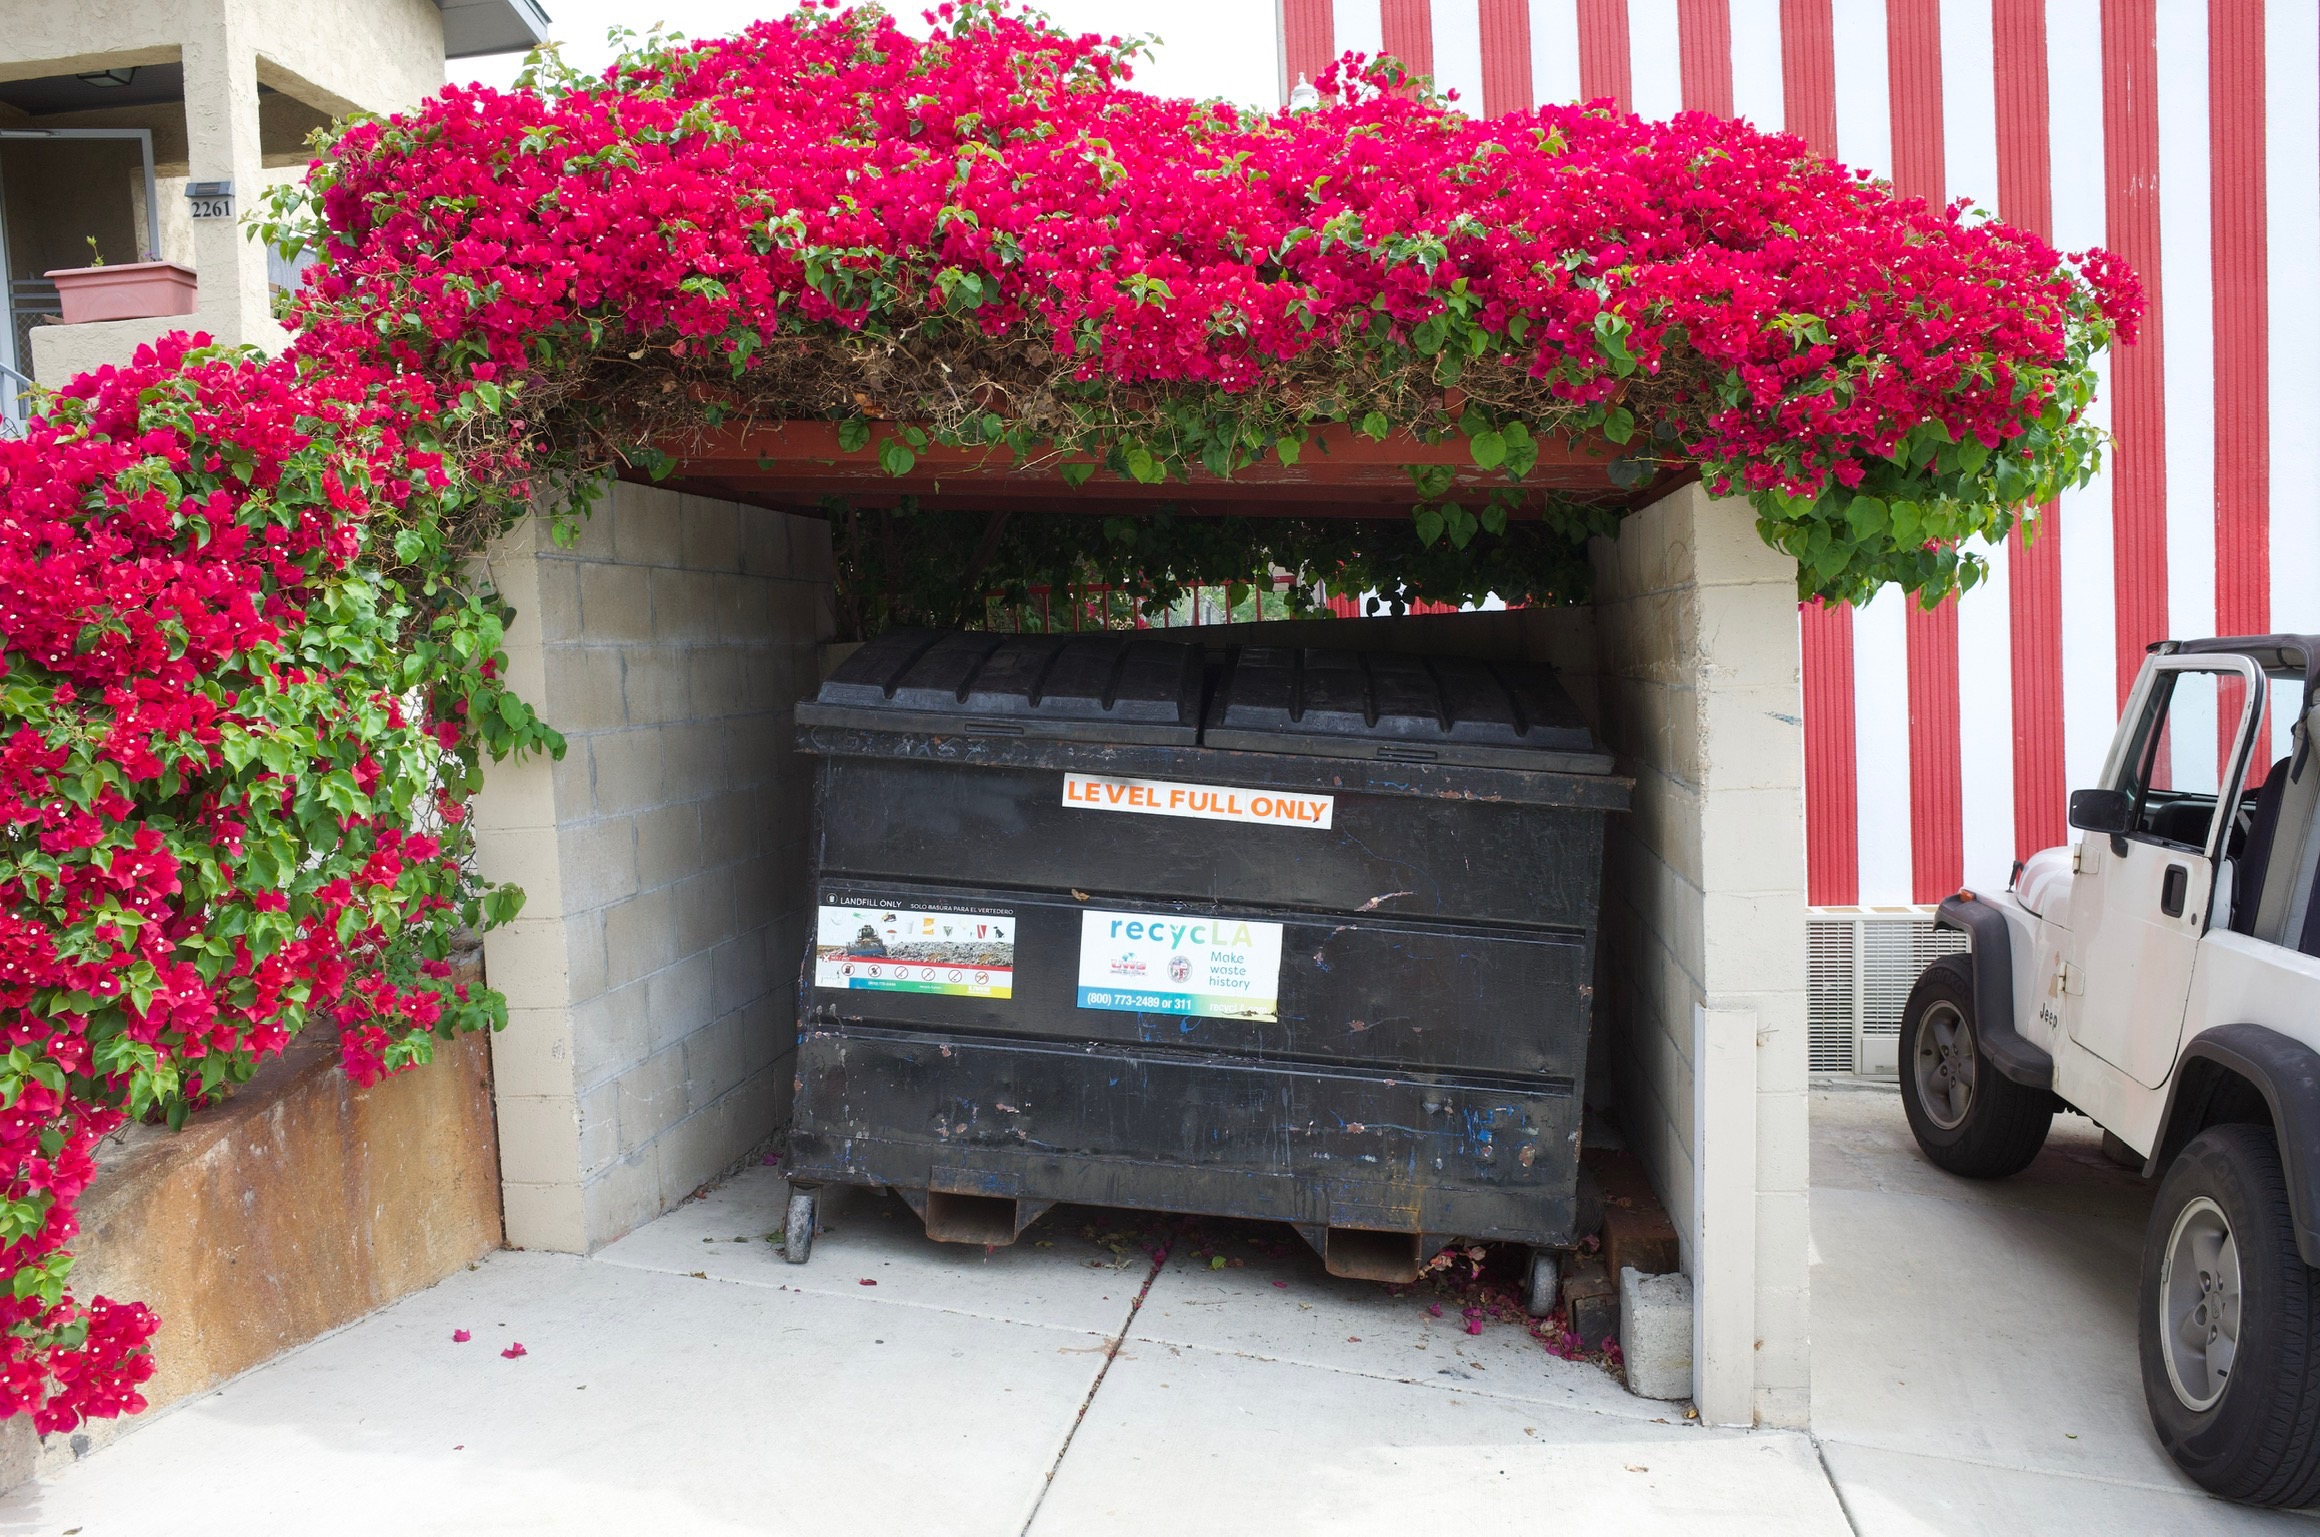 Dumpster with flowers